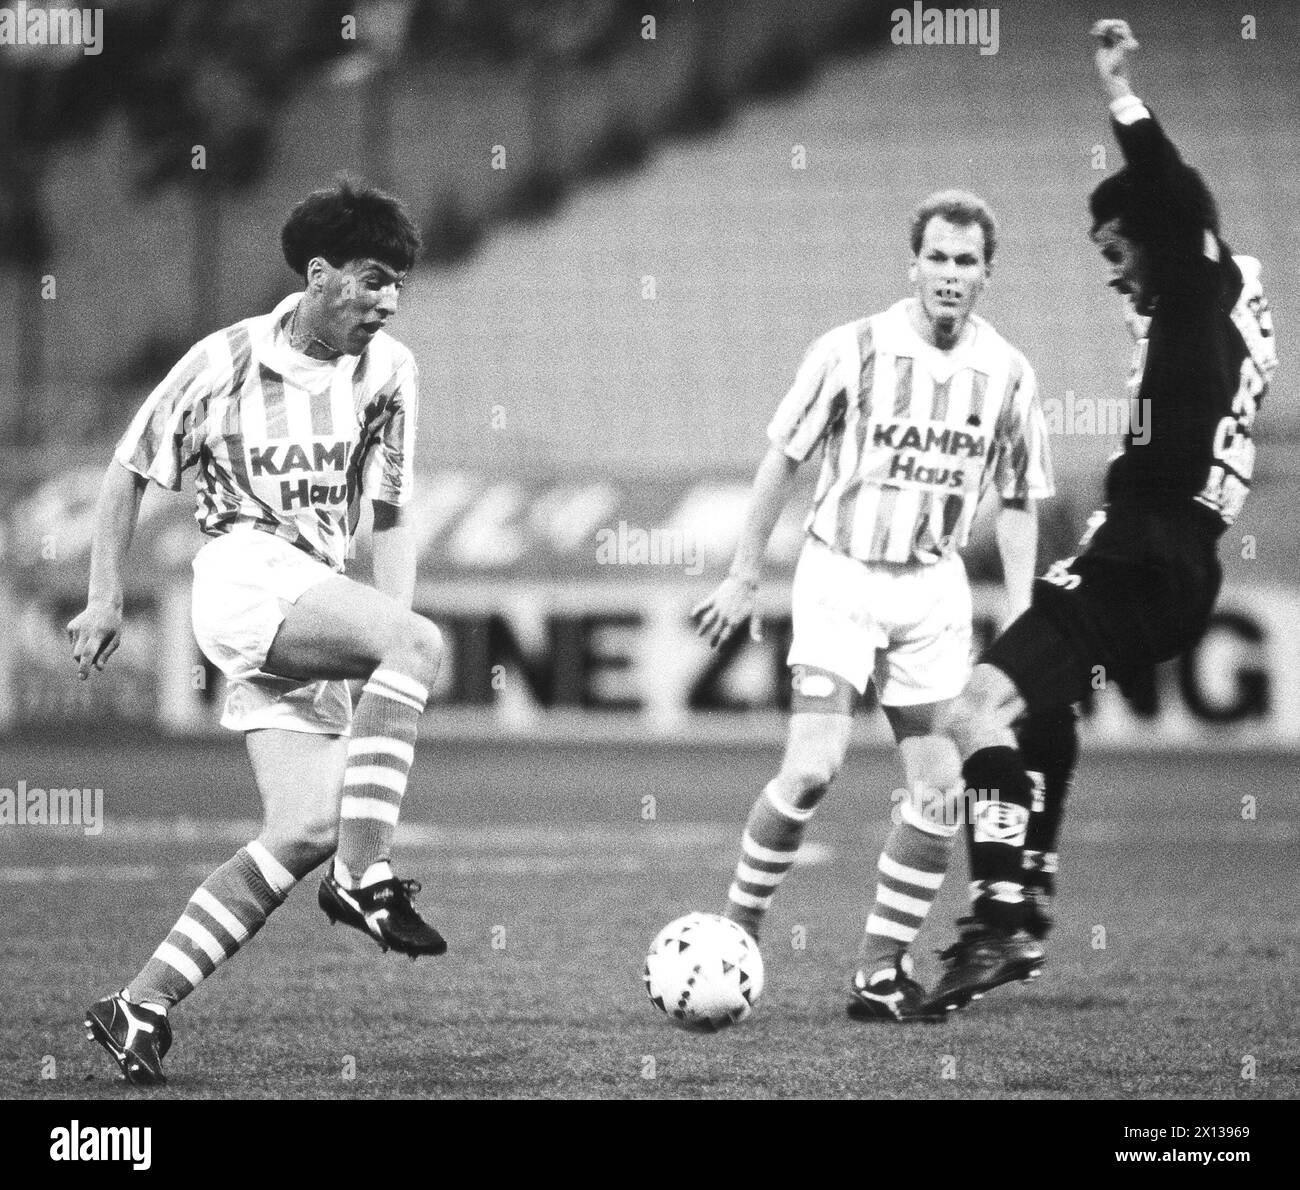 (l-r): Herbert Gager, Alexander Metlitzky and Johannes Abfalter on April 23, 1992 during the game Rapid Wien versus Admira Wacker in the Hanappi stadion in Vienna. - 19920423 PD0003 - Rechteinfo: Rights Managed (RM) Stock Photo